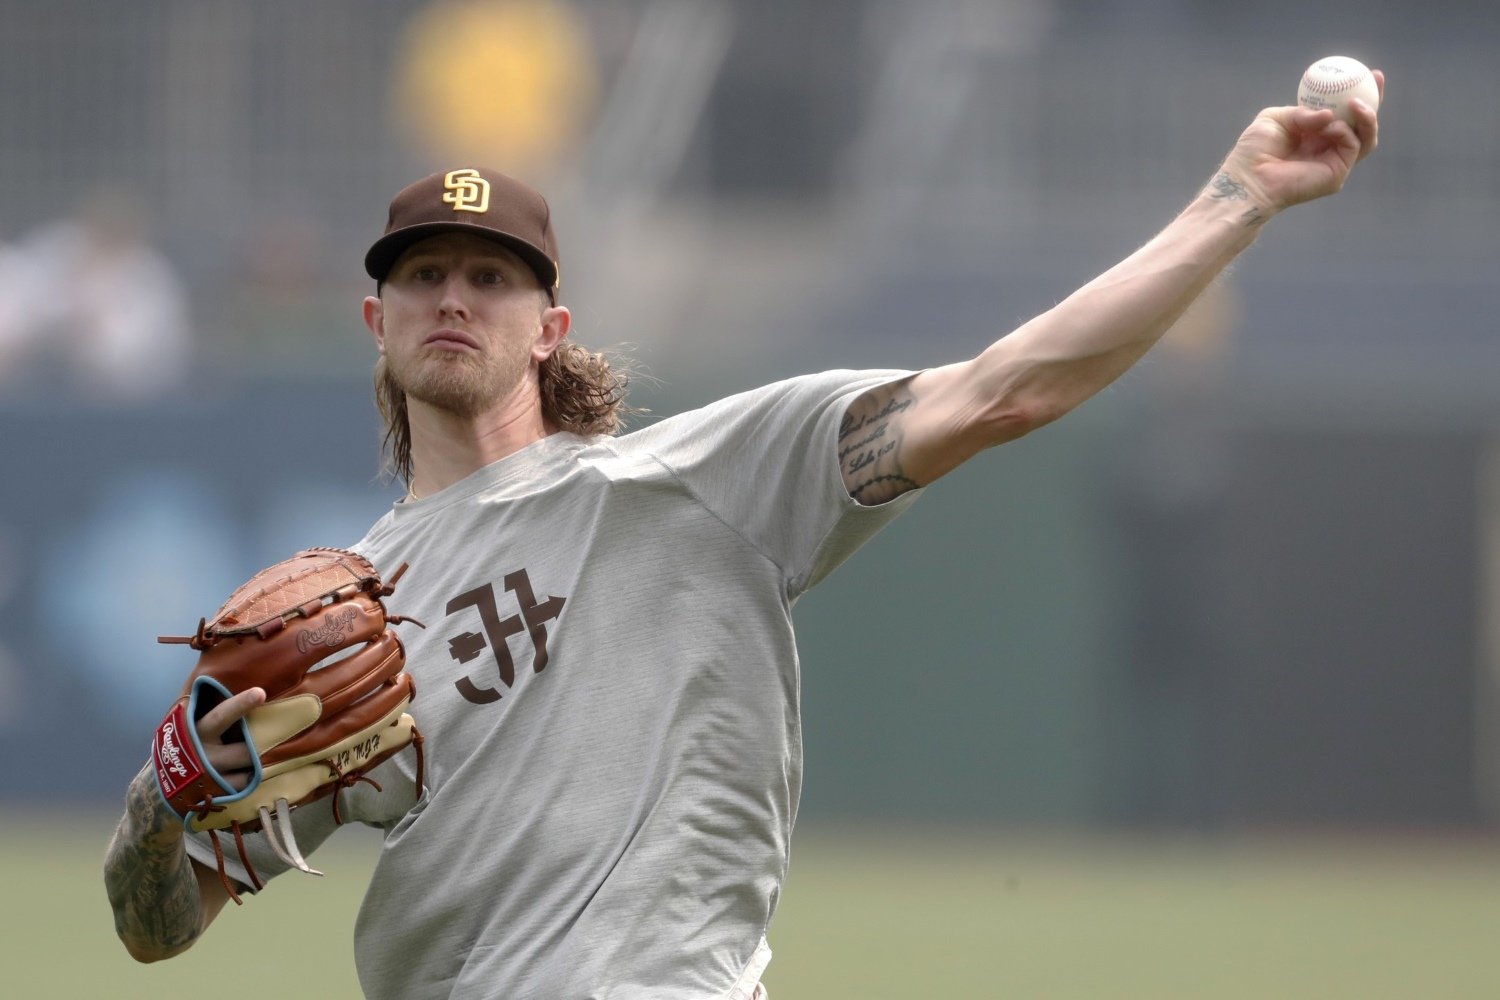 Brewers closer Josh Hader remains on family medical leave